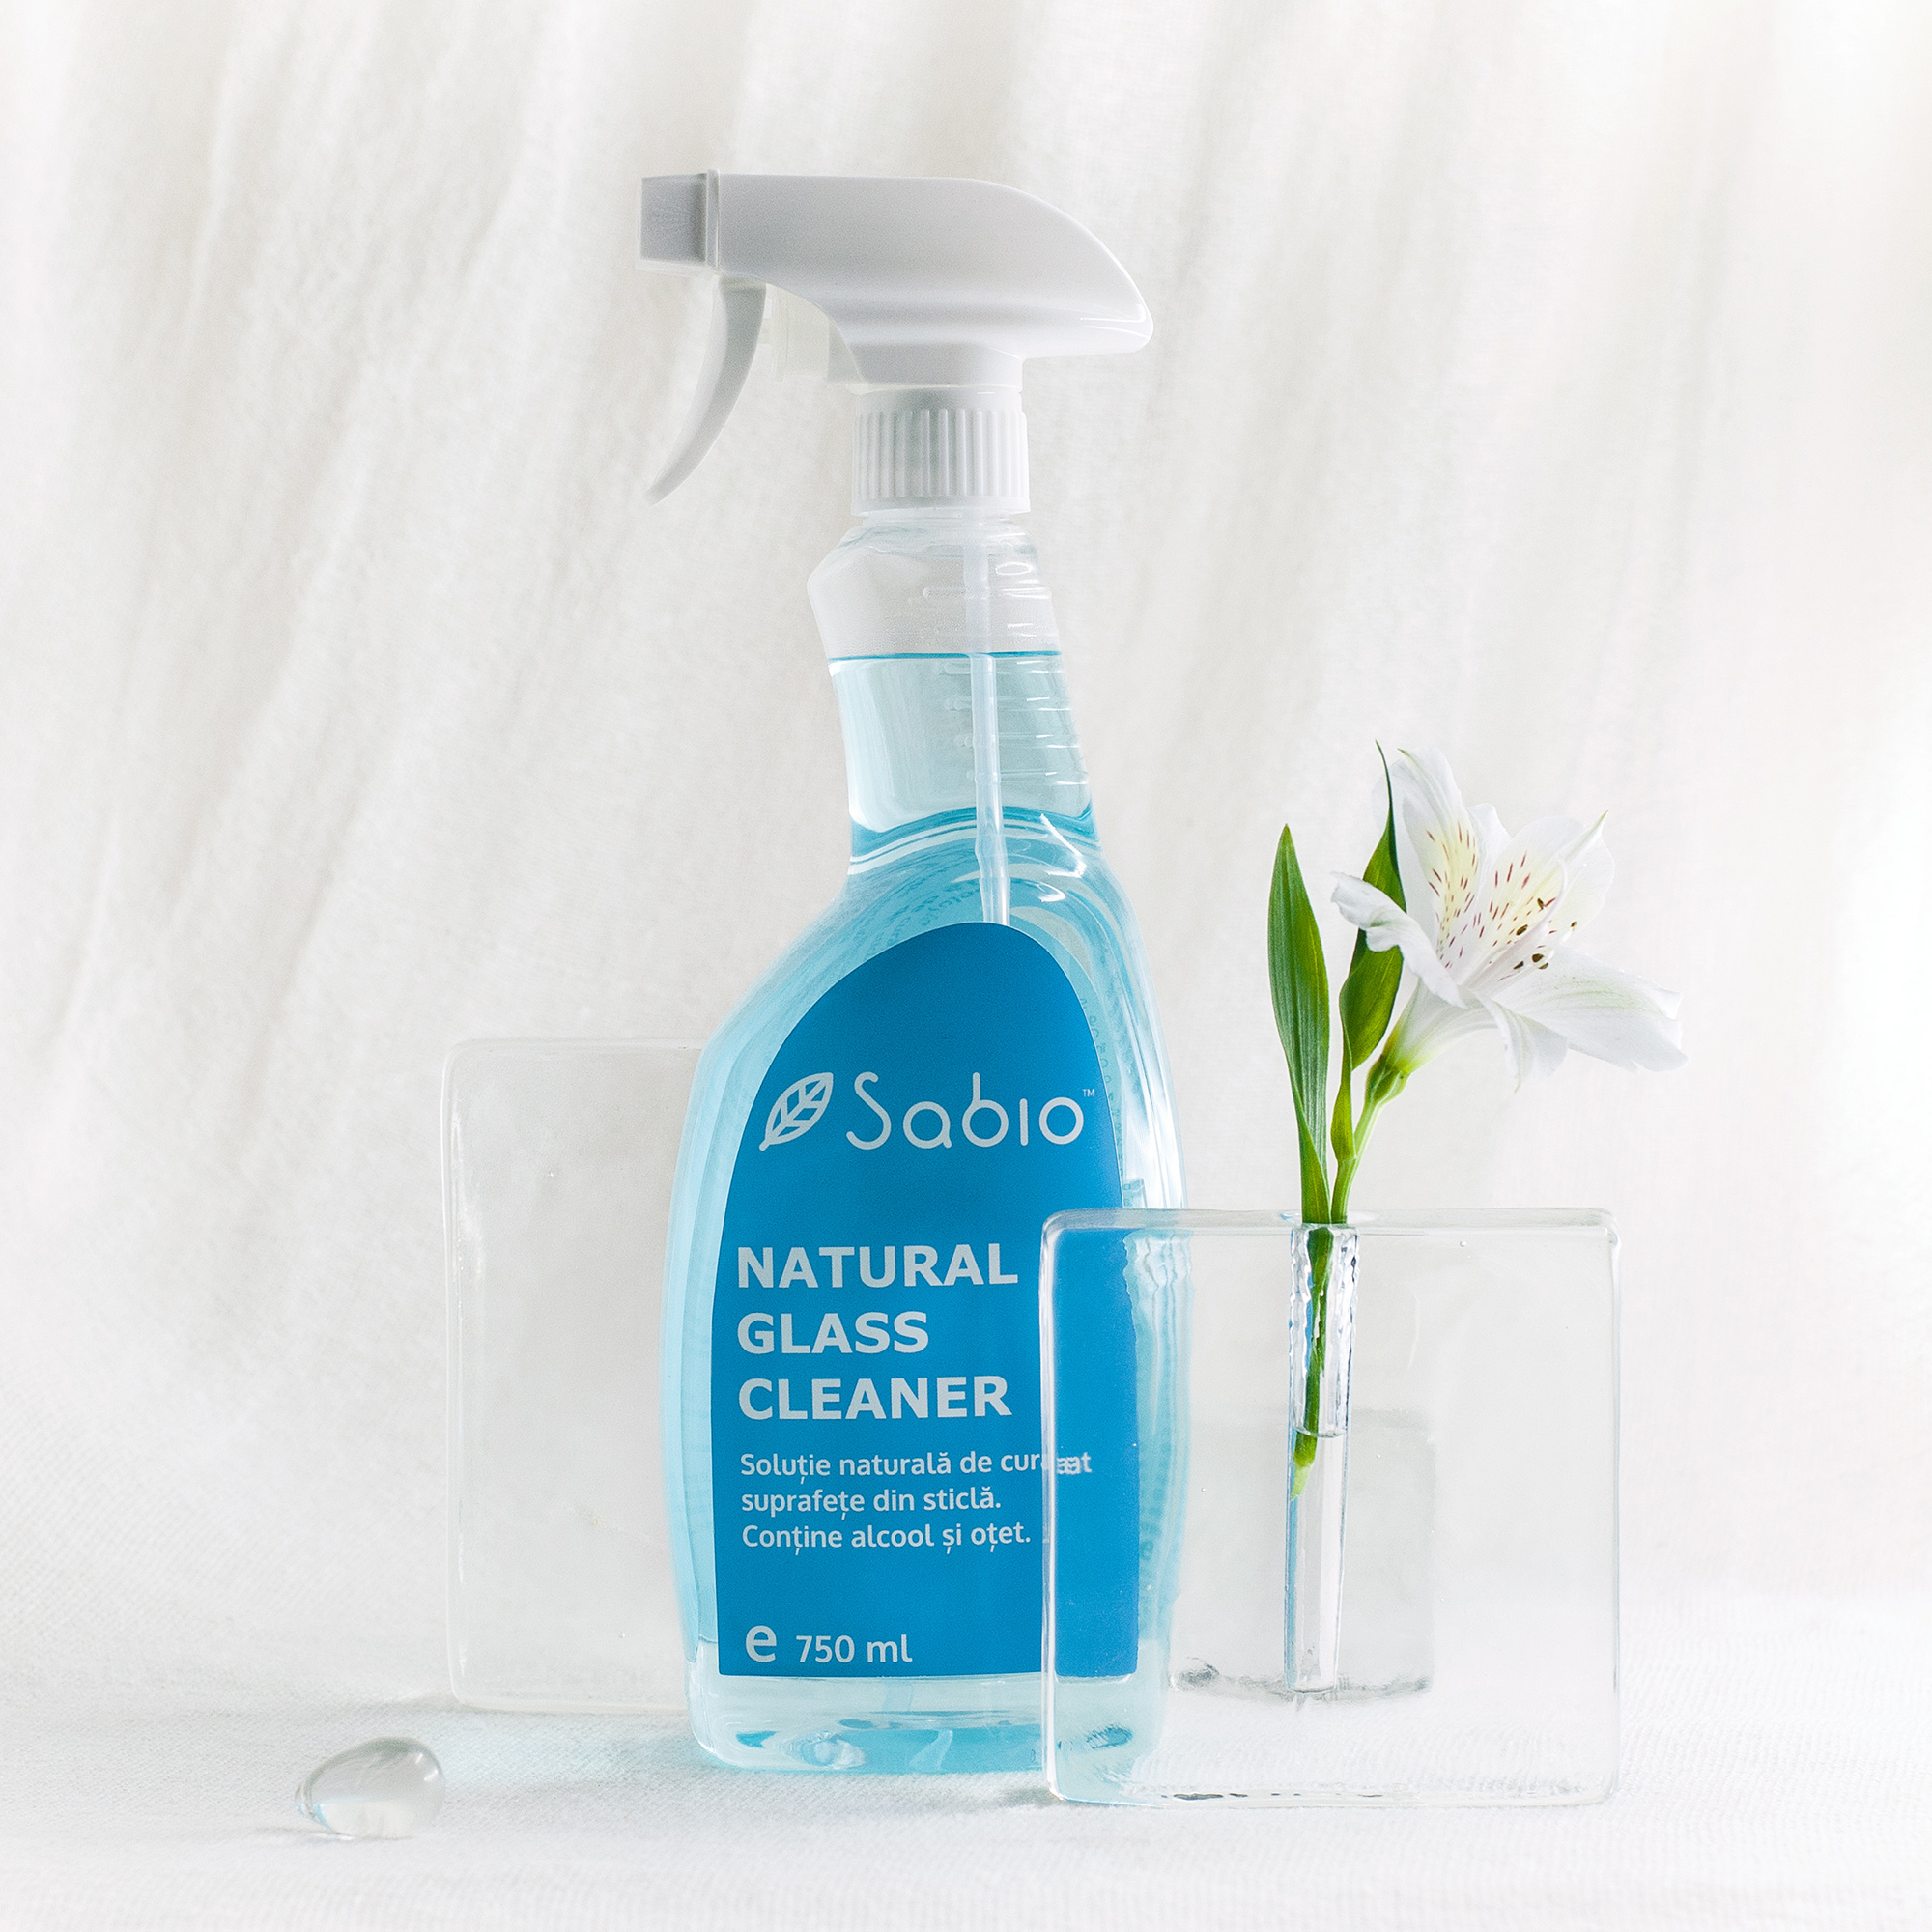 Glass cleaning solution